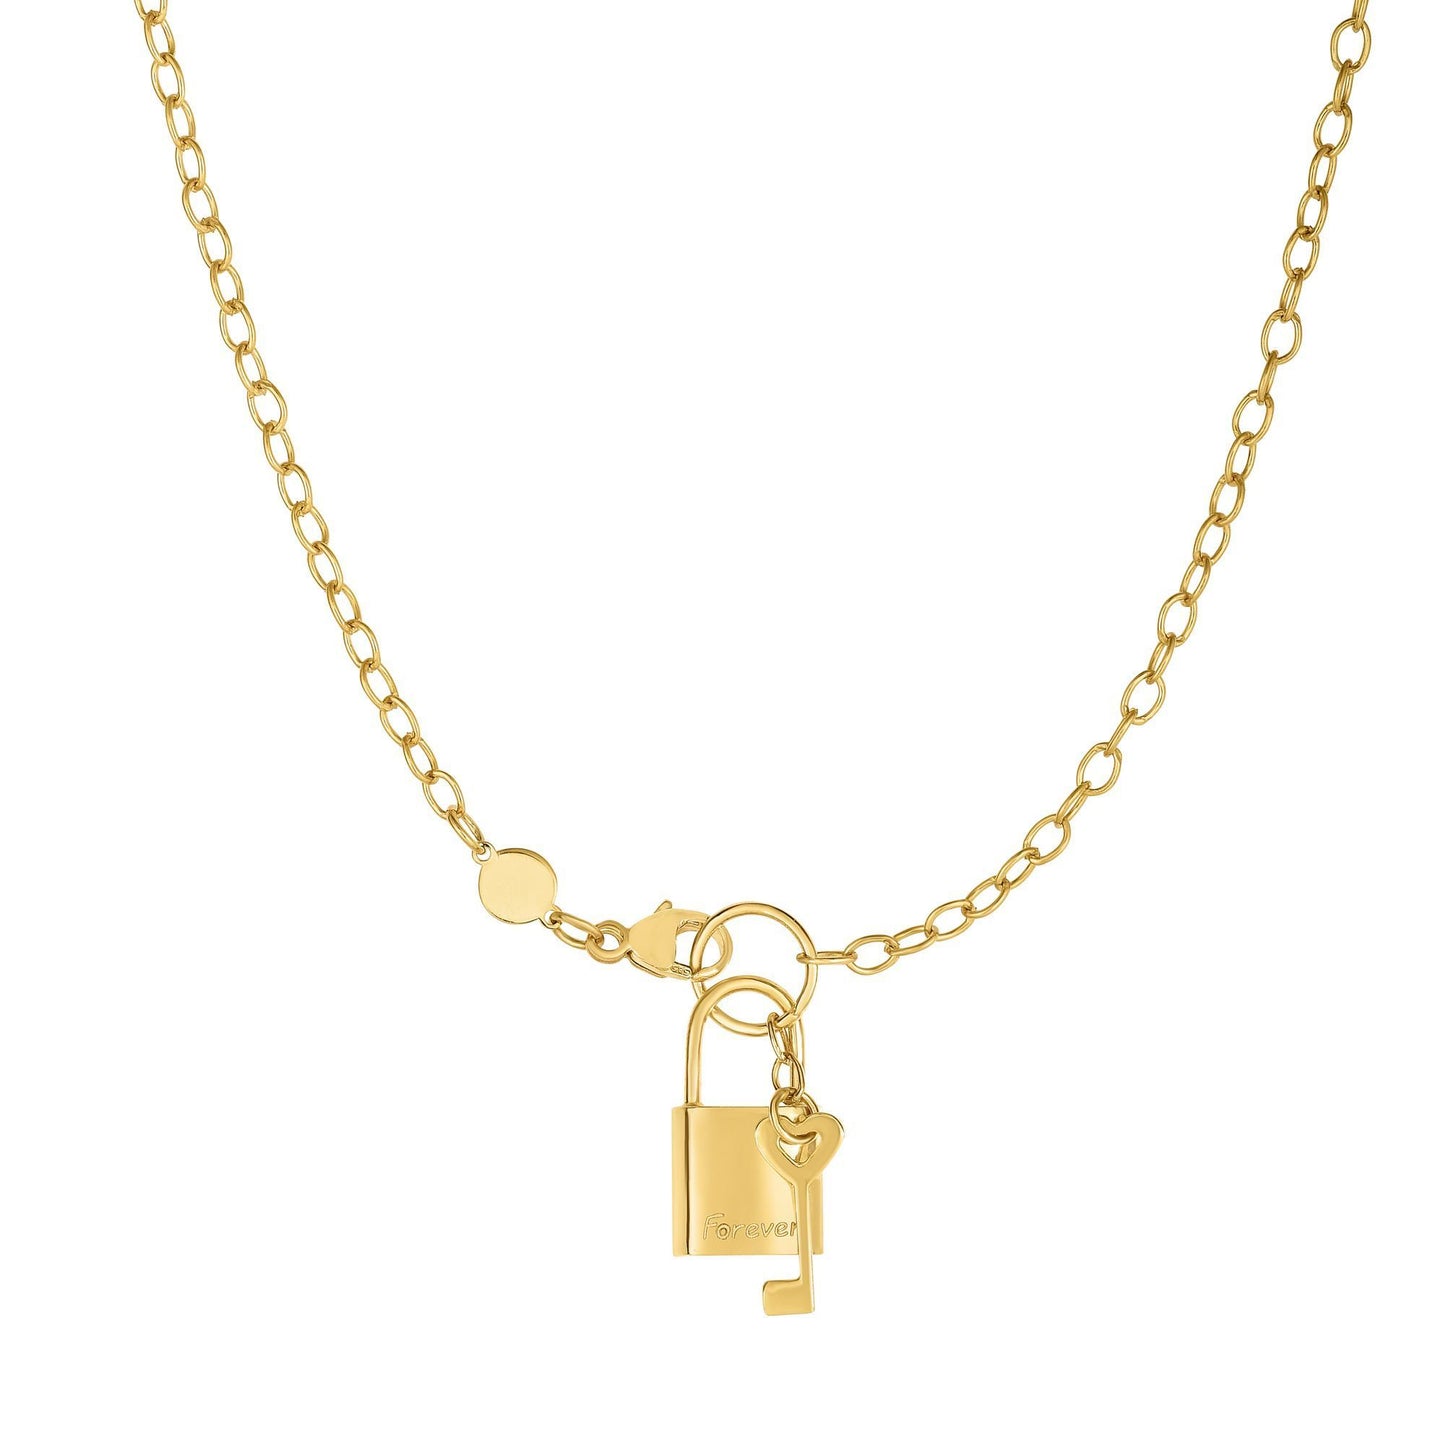 14k yellow gold lock and key pendant necklace